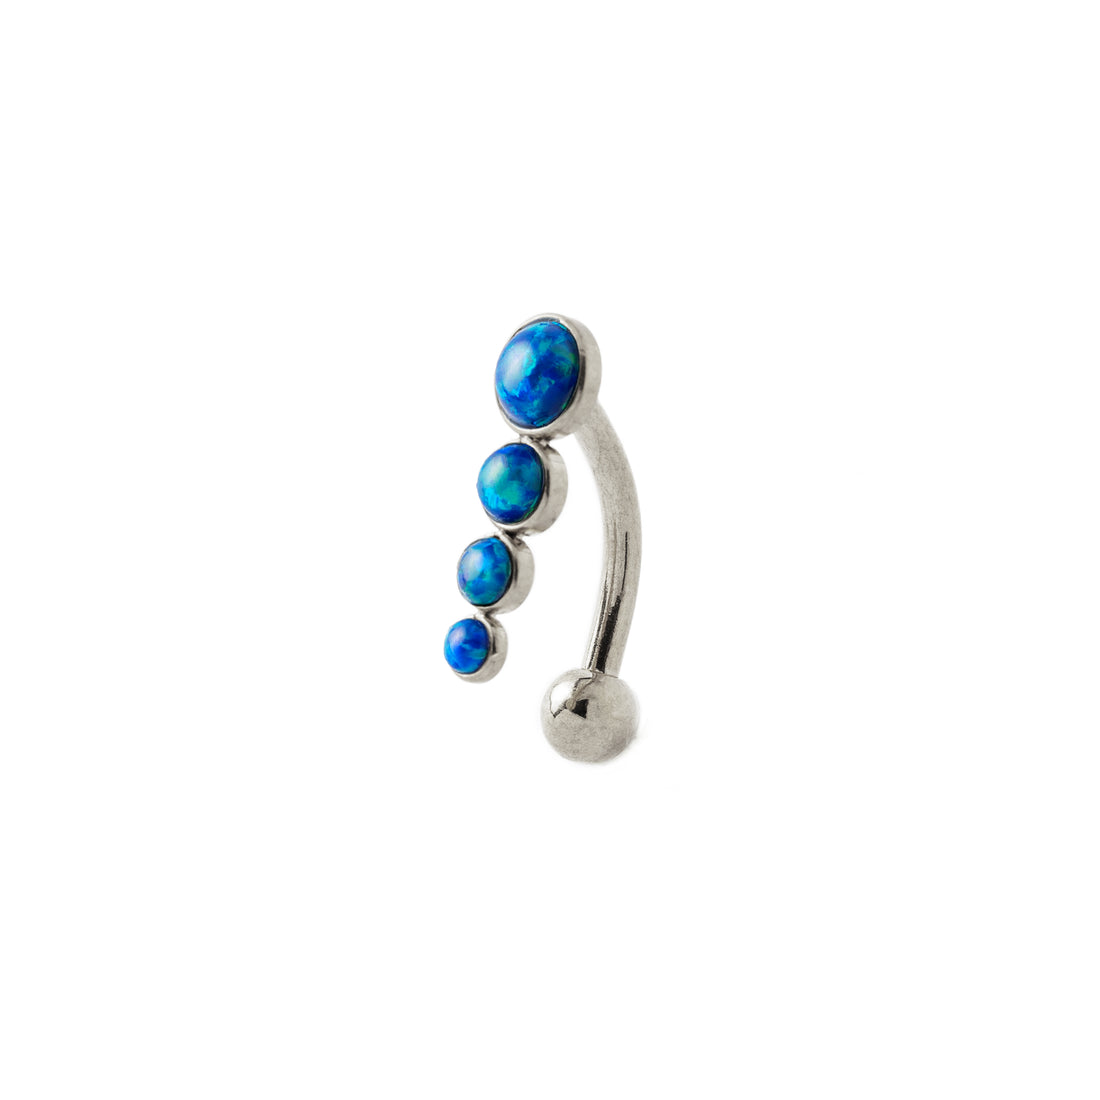 Newton Navel Piercing with Blue Opal right side view